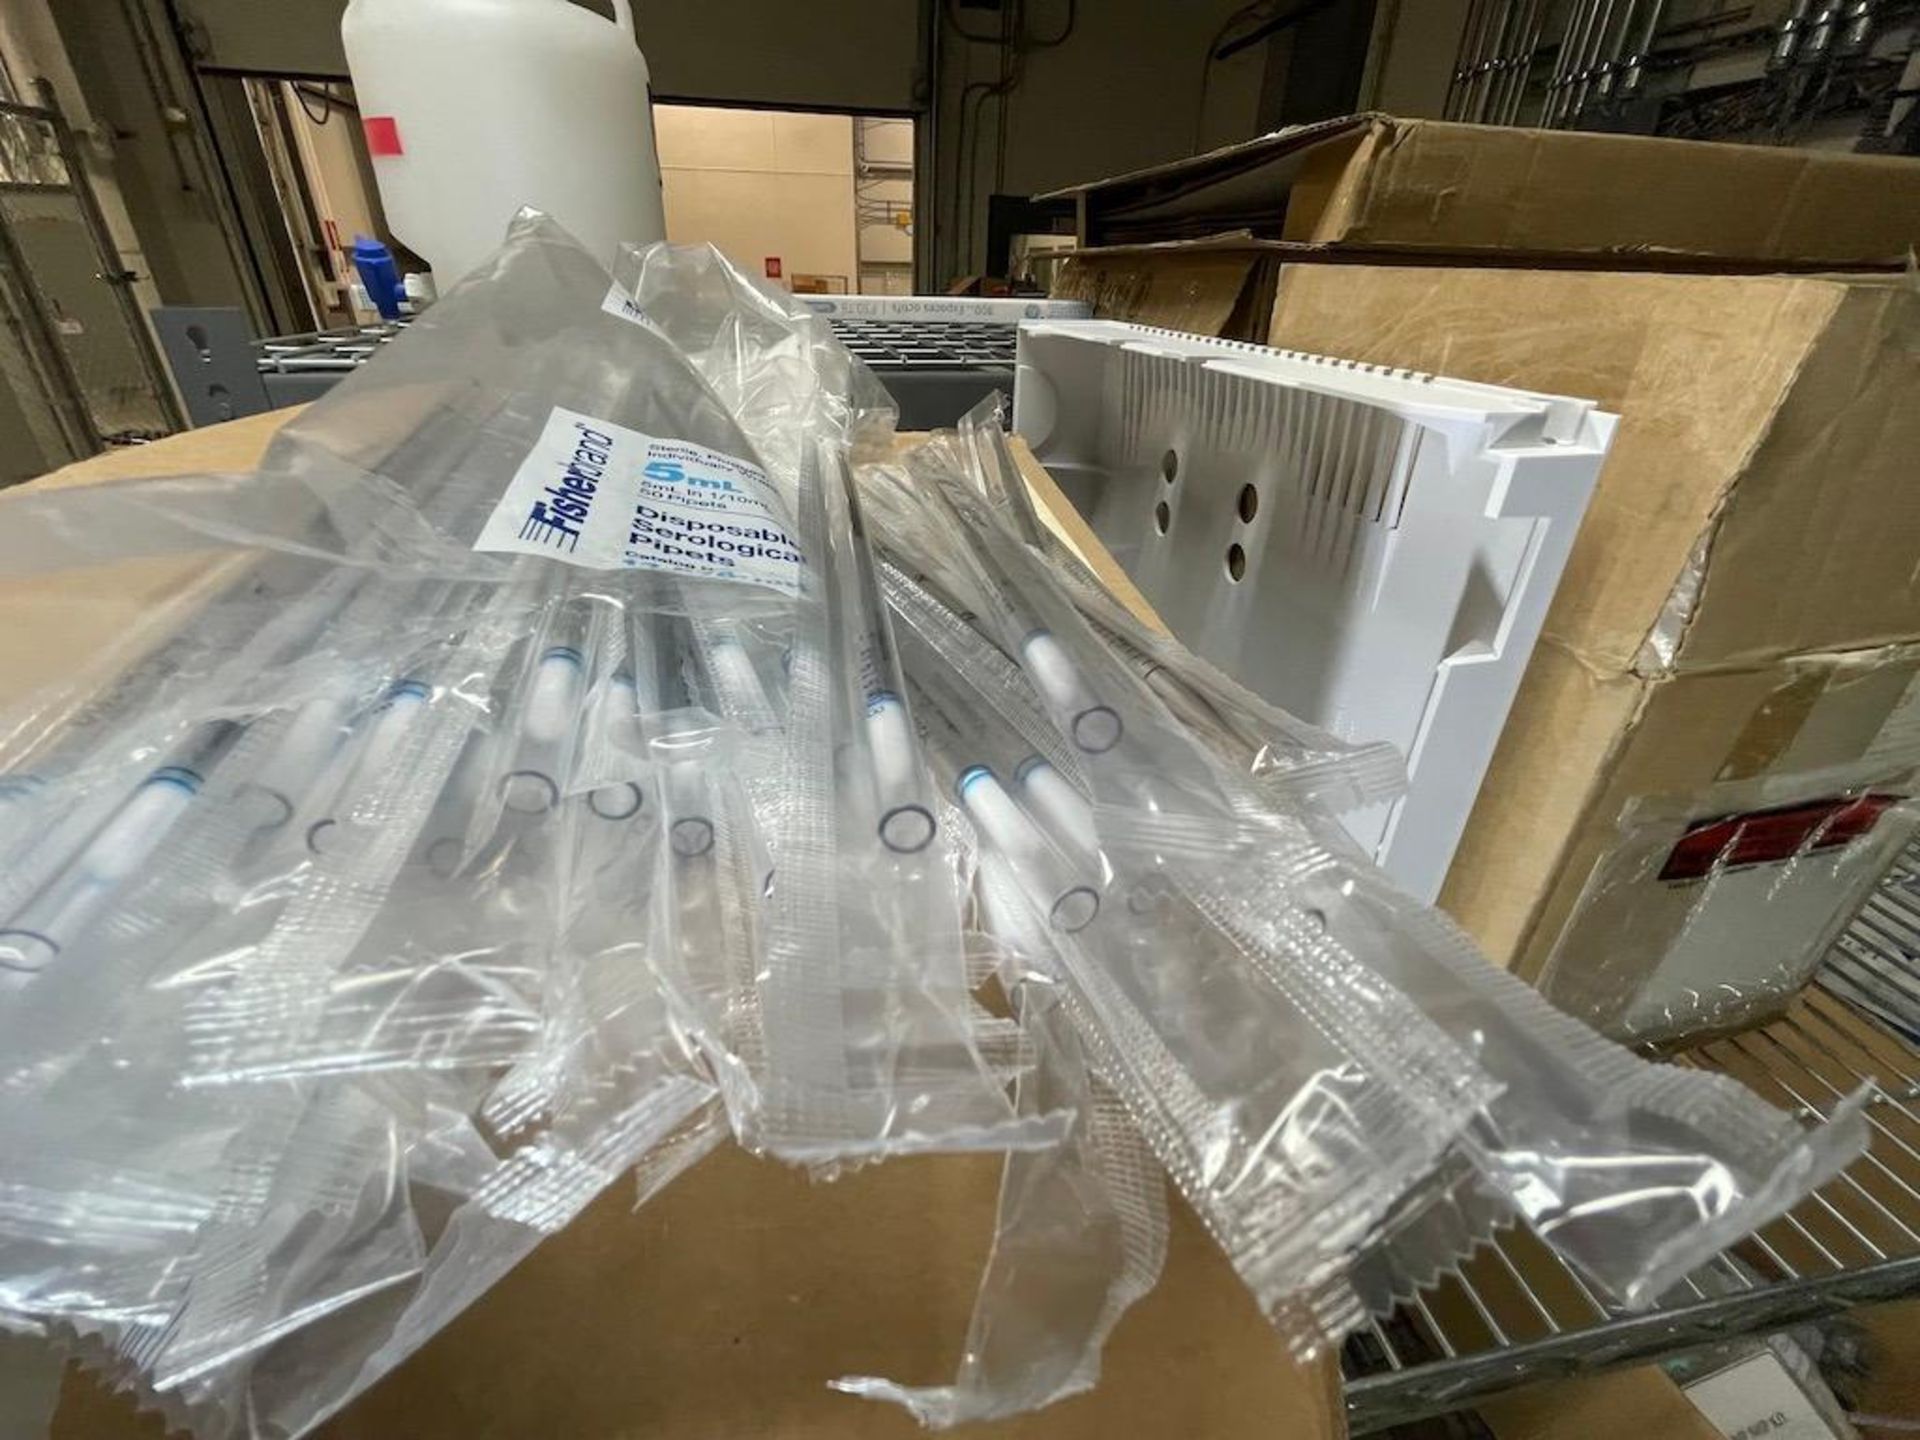 LOT 4 SHELF WIRE FRAME RACK W LARGE BOX OF AGILENT LAB GC PRODUCTS, AUTOSAMPLER SYRINGES, KINETEX LC - Image 22 of 22